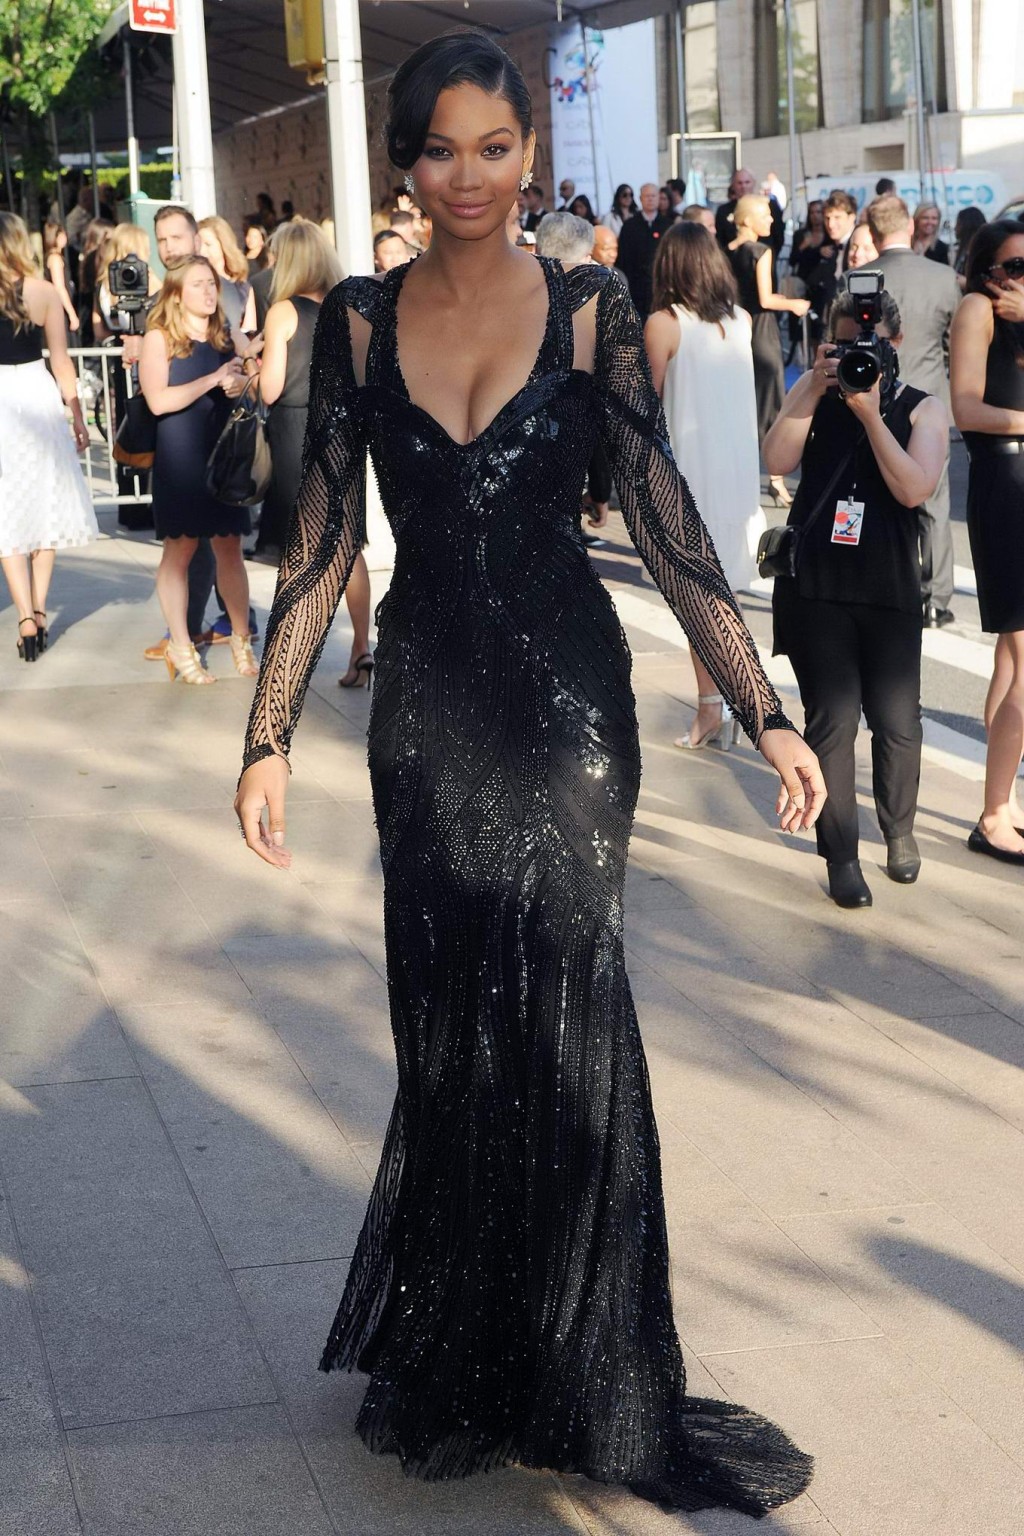 Chanel Iman showing off huge cleavage at the 2014 CFDA fashion awards at Alice T #75195436